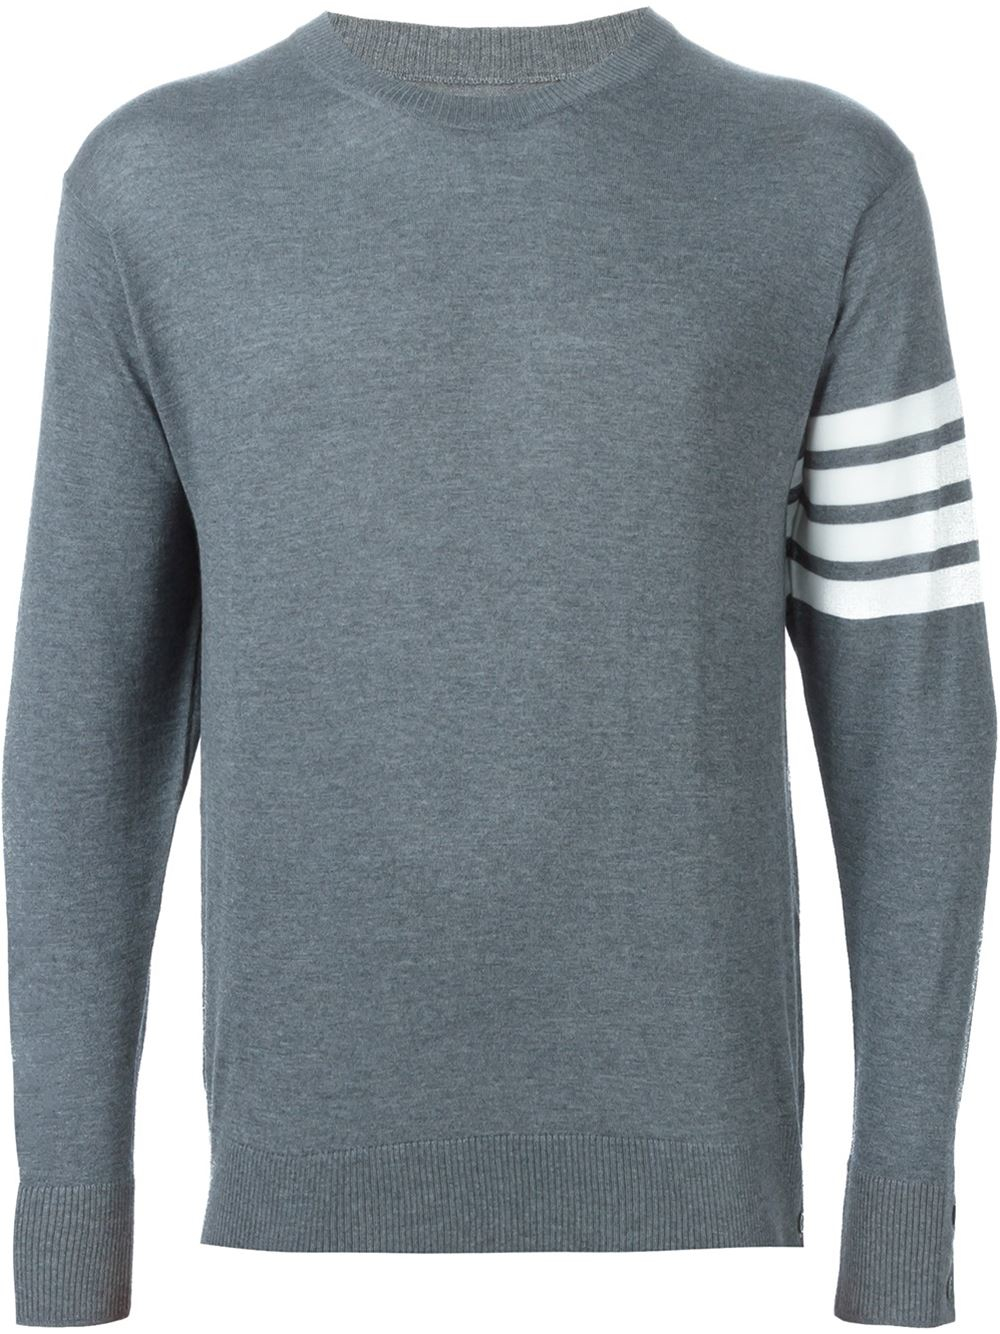 Thom browne Striped Sleeve Detail Sweater in Gray for Men (GREY) | Lyst